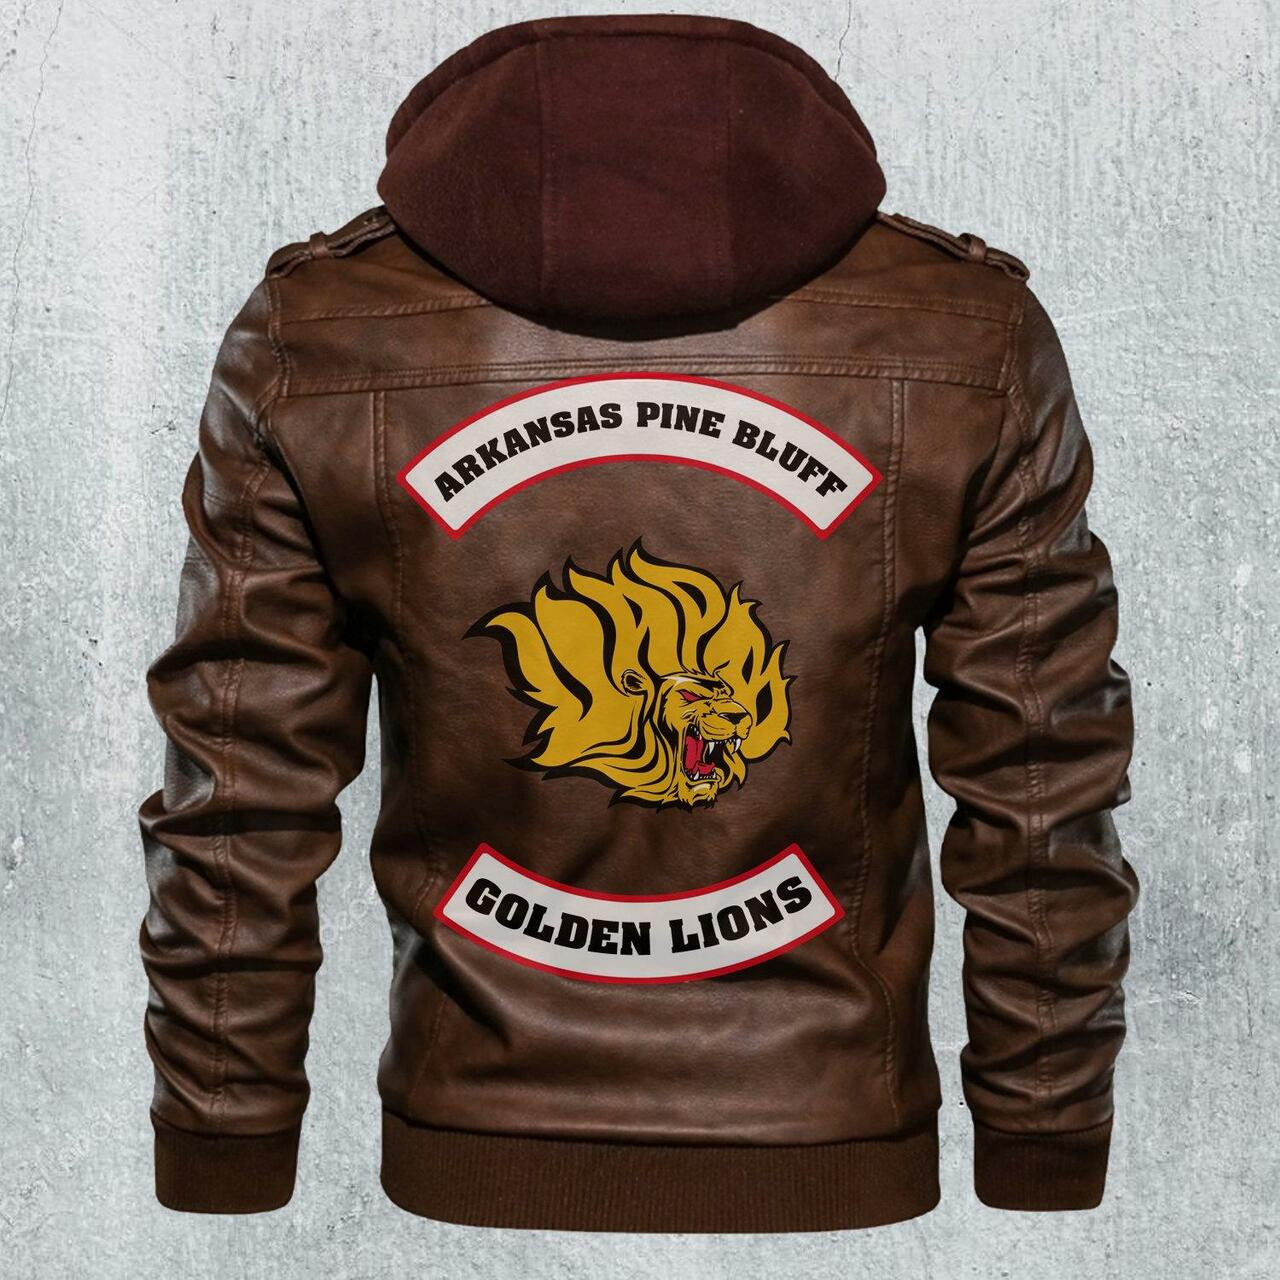 Check out and find the right leather jacket below 80